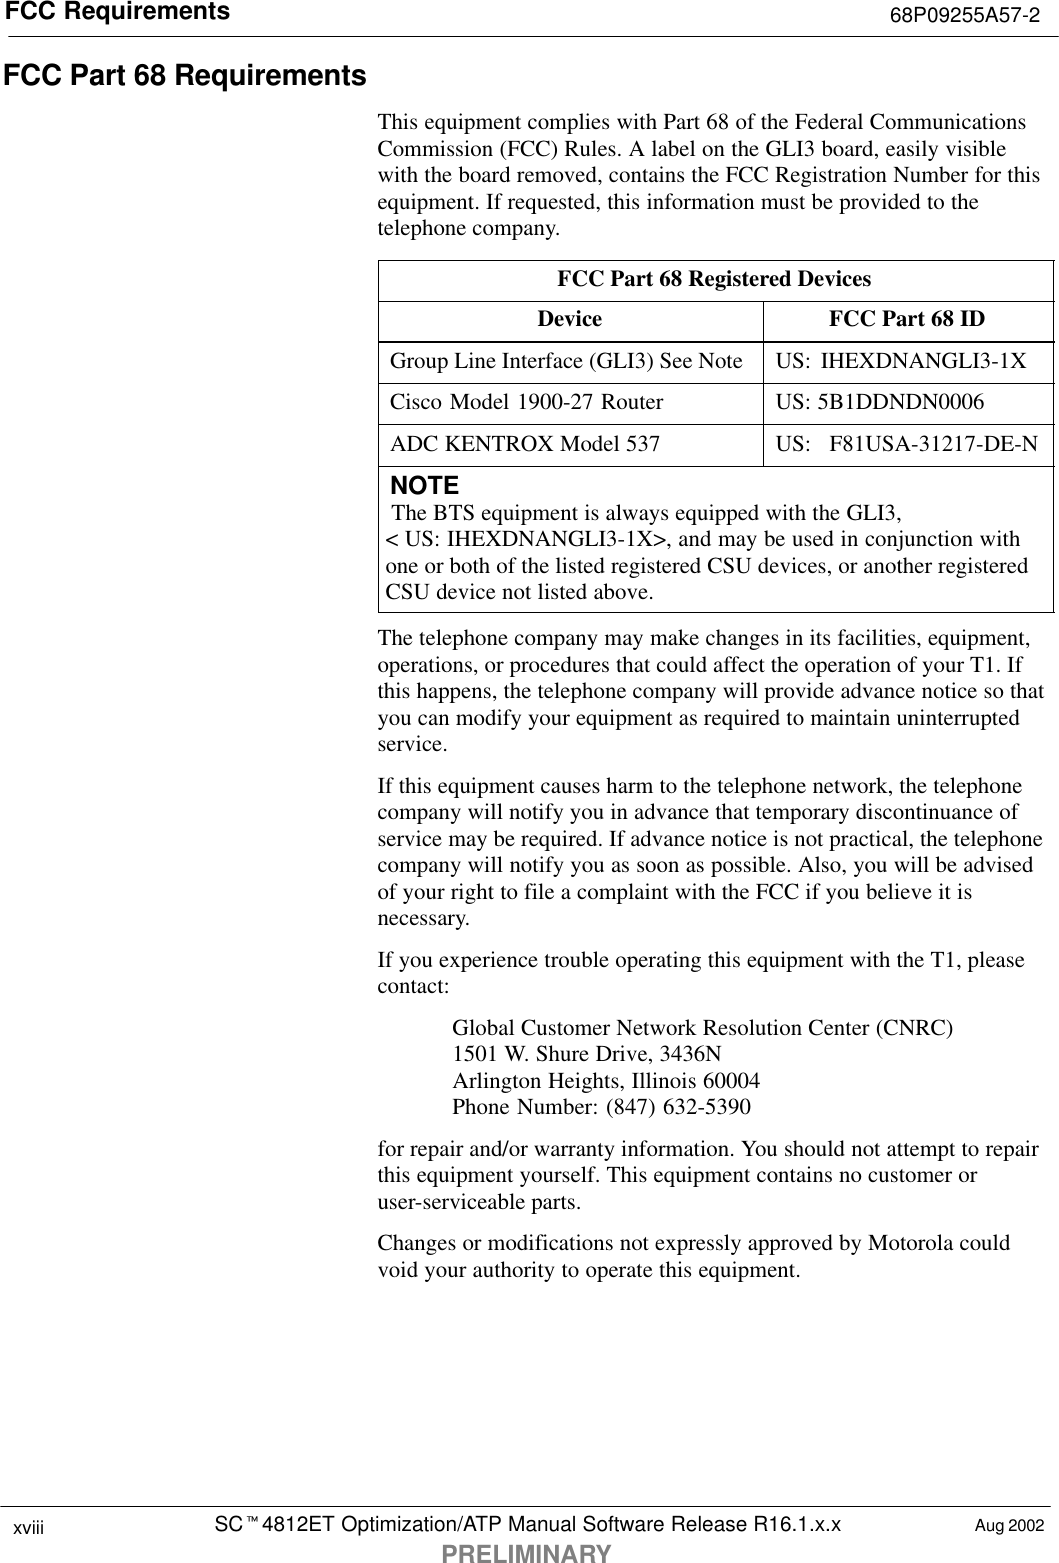 FCC Requirements 68P09255A57-2SCt4812ET Optimization/ATP Manual Software Release R16.1.x.xPRELIMINARYxviii Aug 2002FCC Part 68 RequirementsThis equipment complies with Part 68 of the Federal CommunicationsCommission (FCC) Rules. A label on the GLI3 board, easily visiblewith the board removed, contains the FCC Registration Number for thisequipment. If requested, this information must be provided to thetelephone company.FCC Part 68 Registered DevicesDevice FCC Part 68 IDGroup Line Interface (GLI3) See Note US: IHEXDNANGLI3-1XCisco Model 1900-27 Router US: 5B1DDNDN0006ADC KENTROX Model 537 US: F81USA-31217-DE-NNOTE The BTS equipment is always equipped with the GLI3, &lt; US: IHEXDNANGLI3-1X&gt;, and may be used in conjunction withone or both of the listed registered CSU devices, or another registeredCSU device not listed above.The telephone company may make changes in its facilities, equipment,operations, or procedures that could affect the operation of your T1. Ifthis happens, the telephone company will provide advance notice so thatyou can modify your equipment as required to maintain uninterruptedservice.If this equipment causes harm to the telephone network, the telephonecompany will notify you in advance that temporary discontinuance ofservice may be required. If advance notice is not practical, the telephonecompany will notify you as soon as possible. Also, you will be advisedof your right to file a complaint with the FCC if you believe it isnecessary.If you experience trouble operating this equipment with the T1, pleasecontact:Global Customer Network Resolution Center (CNRC)1501 W. Shure Drive, 3436NArlington Heights, Illinois 60004Phone Number: (847) 632-5390for repair and/or warranty information. You should not attempt to repairthis equipment yourself. This equipment contains no customer oruser-serviceable parts.Changes or modifications not expressly approved by Motorola couldvoid your authority to operate this equipment.